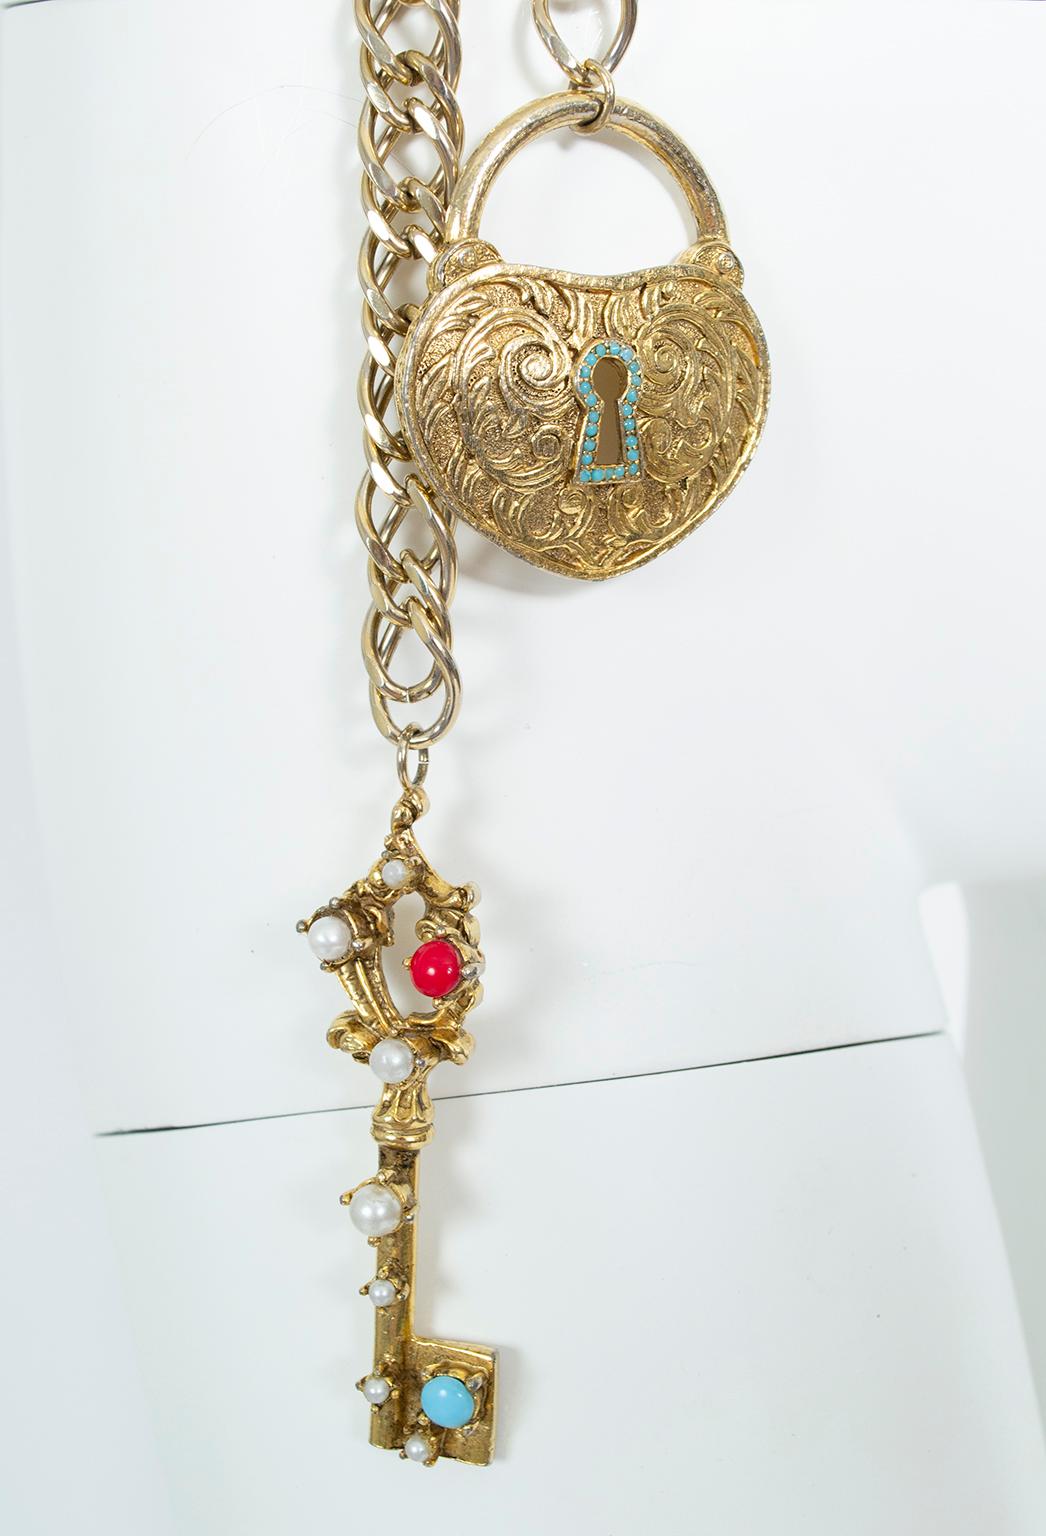 Pauline Rader Gold Lock and Key to My Heart Chain Belt Necklace – XS-S, 1960s In Good Condition For Sale In Tucson, AZ